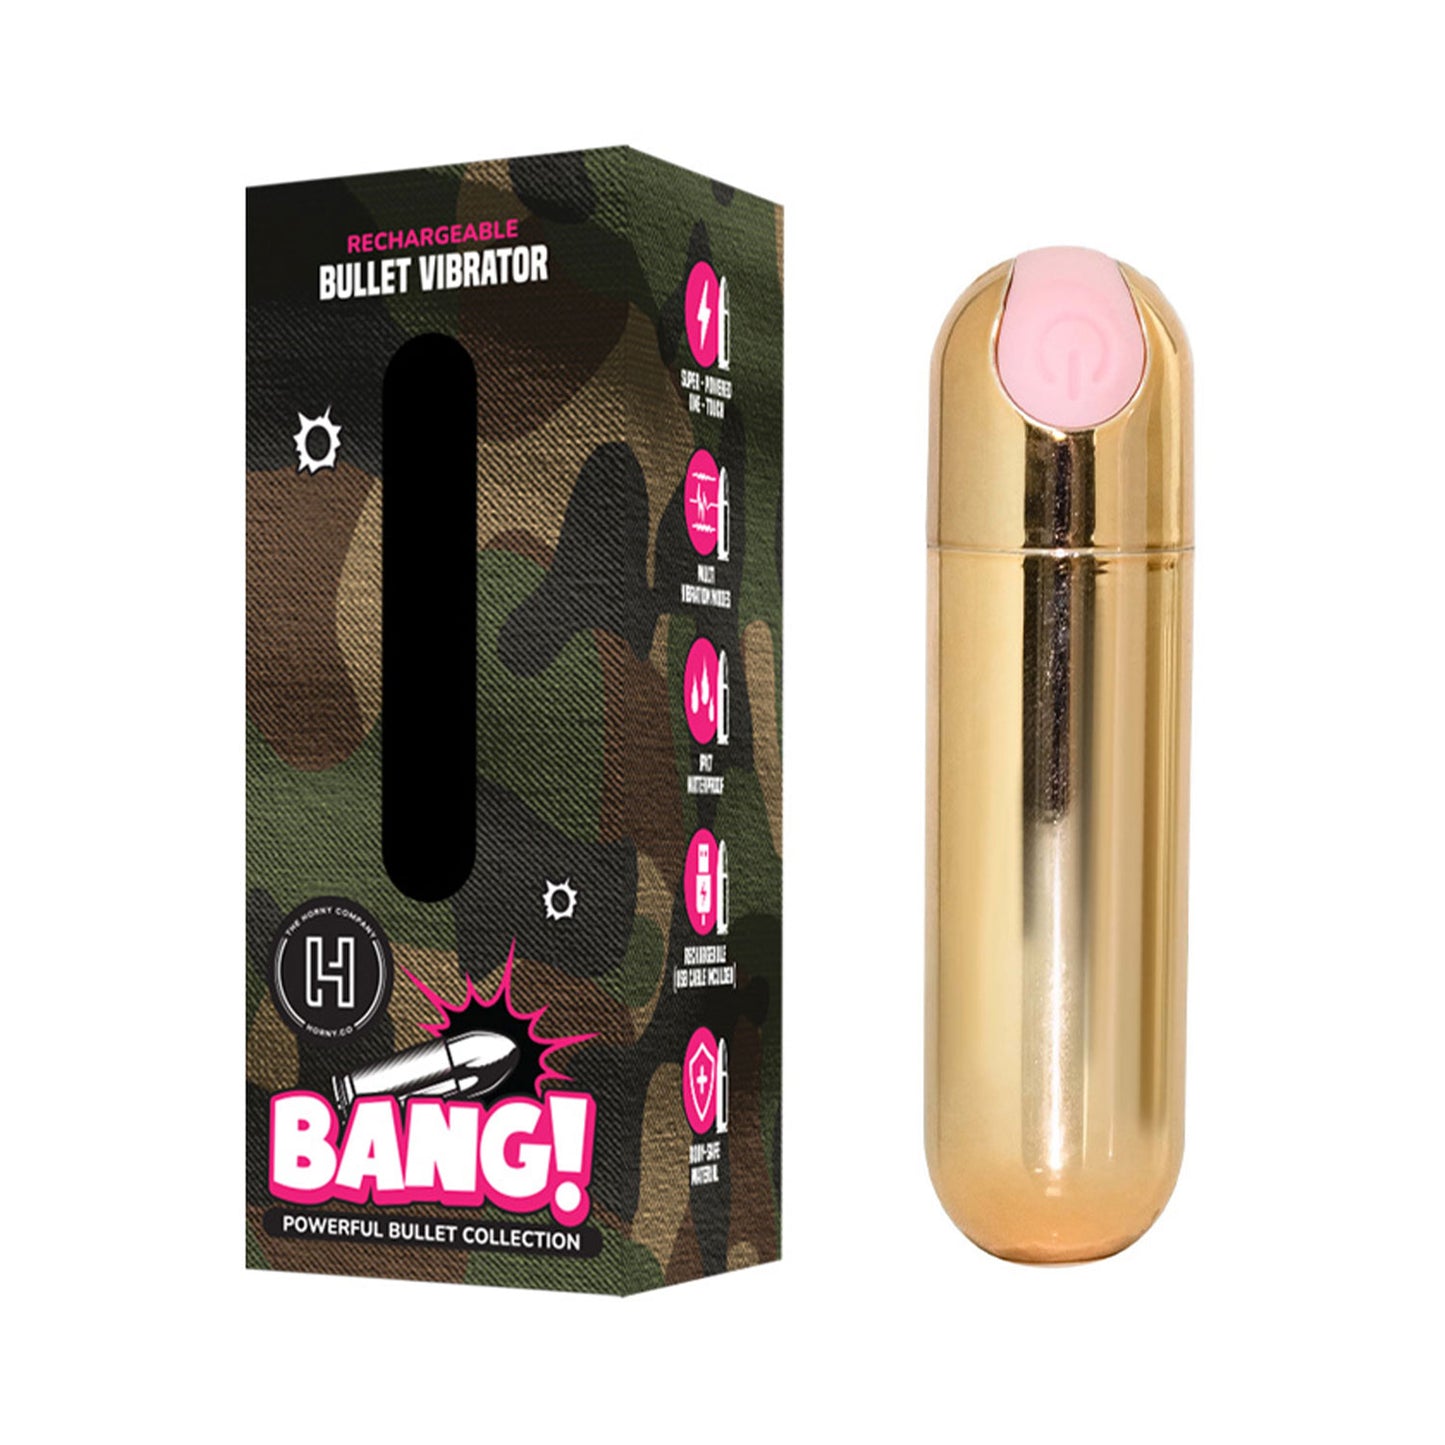 The Horny Company - Bang! Rechargeable Bullet Vibrator Gold/Pink